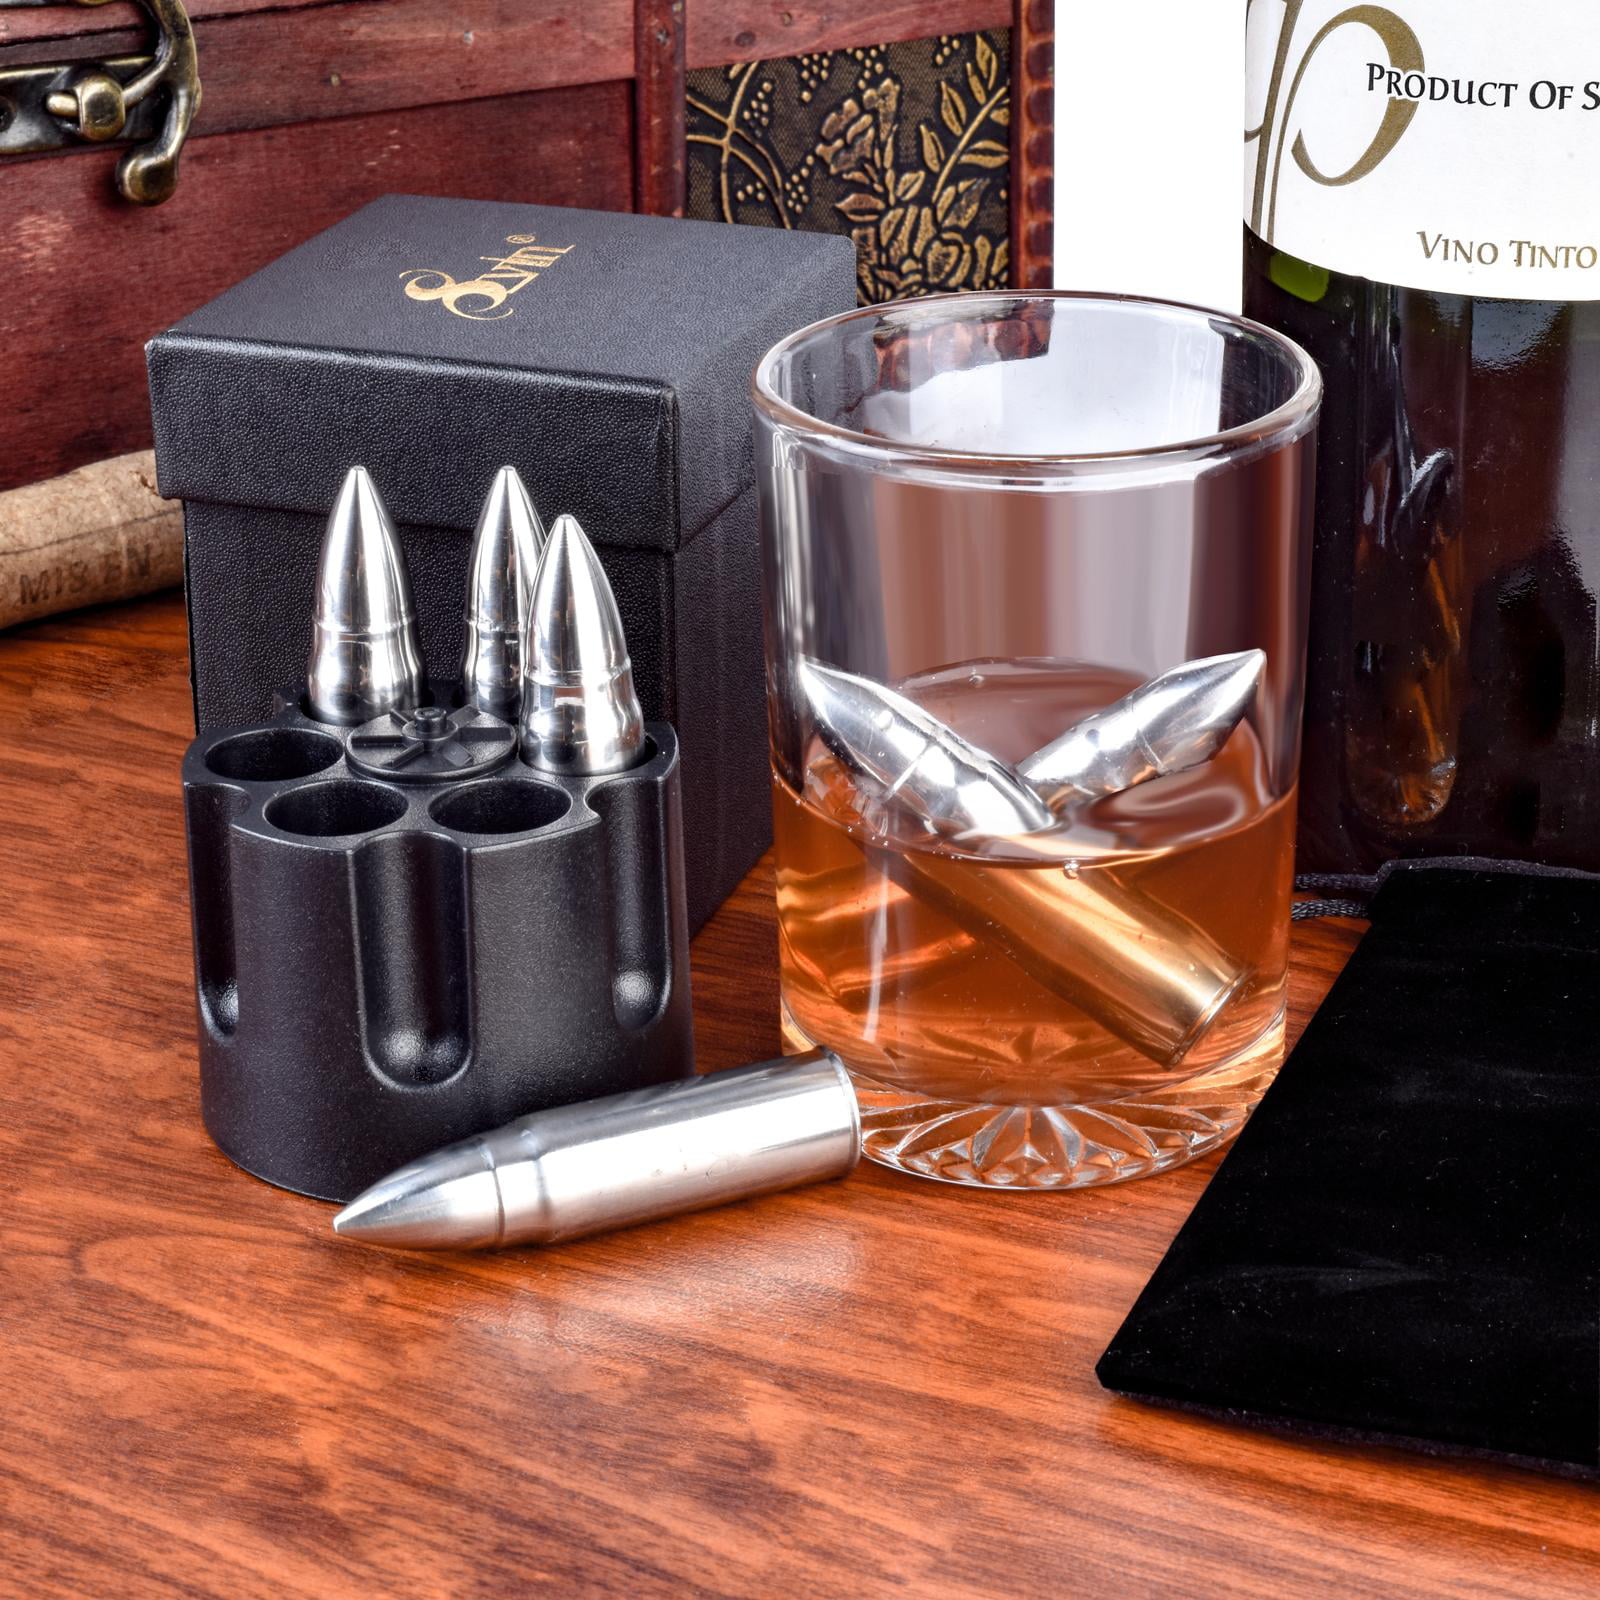 Whiskey Stones Bullets with Base - Silver XL Whiskey Ice Cubes Reusable for  Men - Set of 6 Whiskey Bullets Stainless Steel in Revolver Base - Chilling